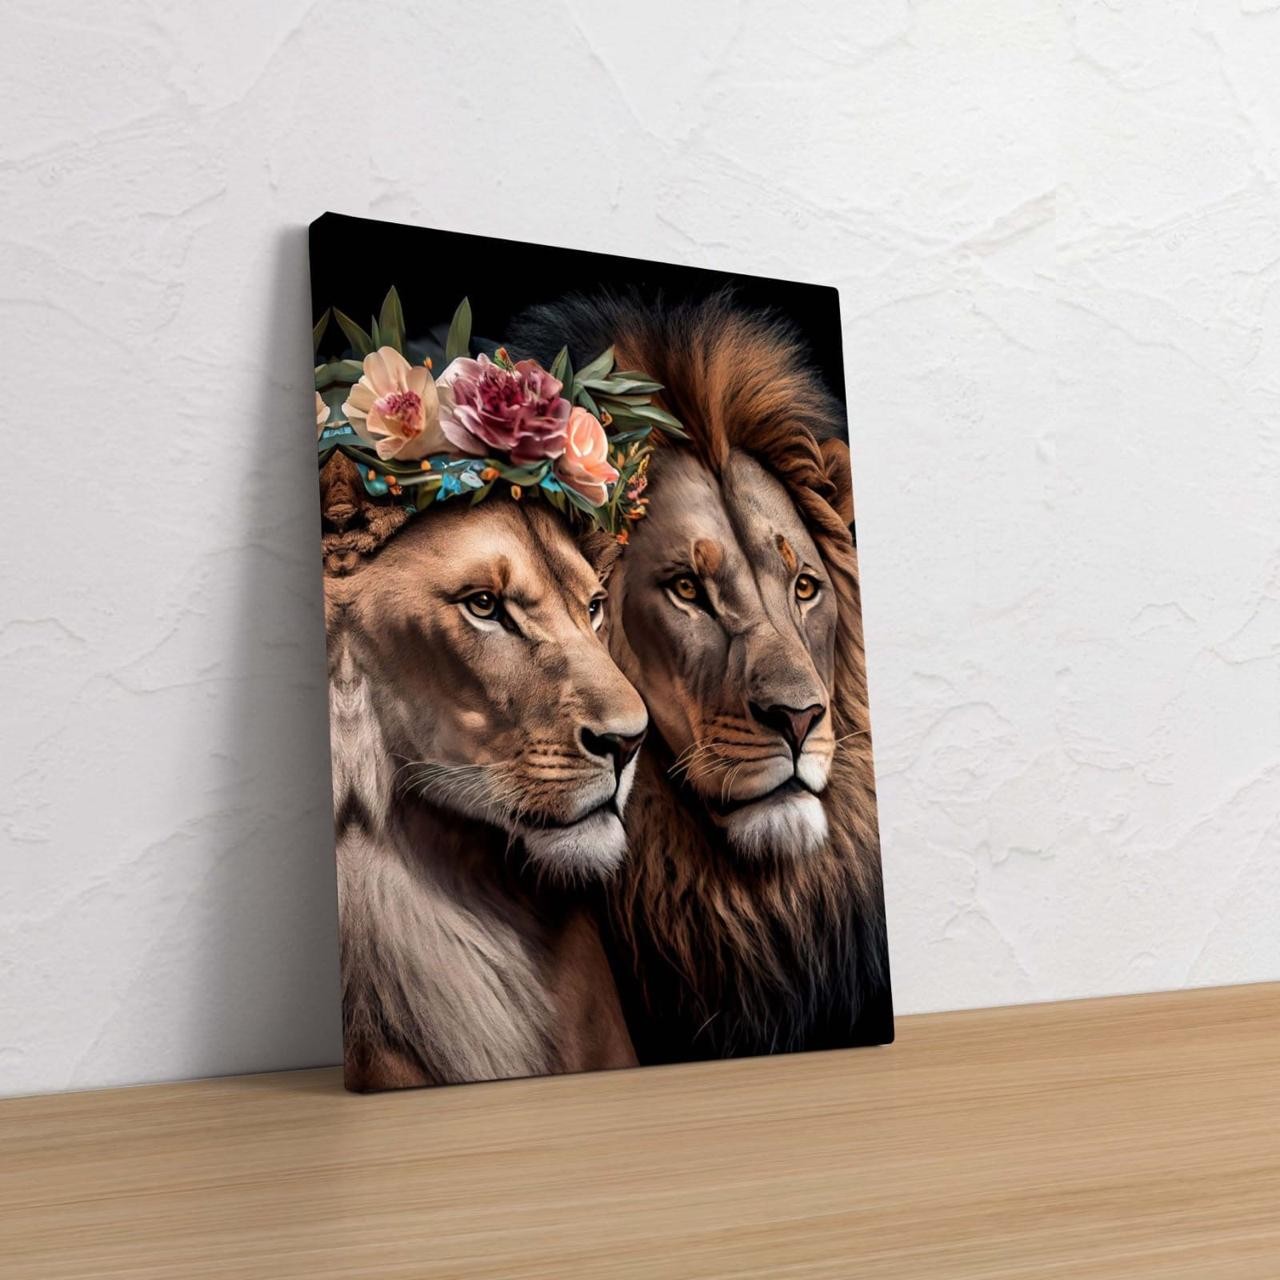 Printed On High Quality Fabric Lion wall paper